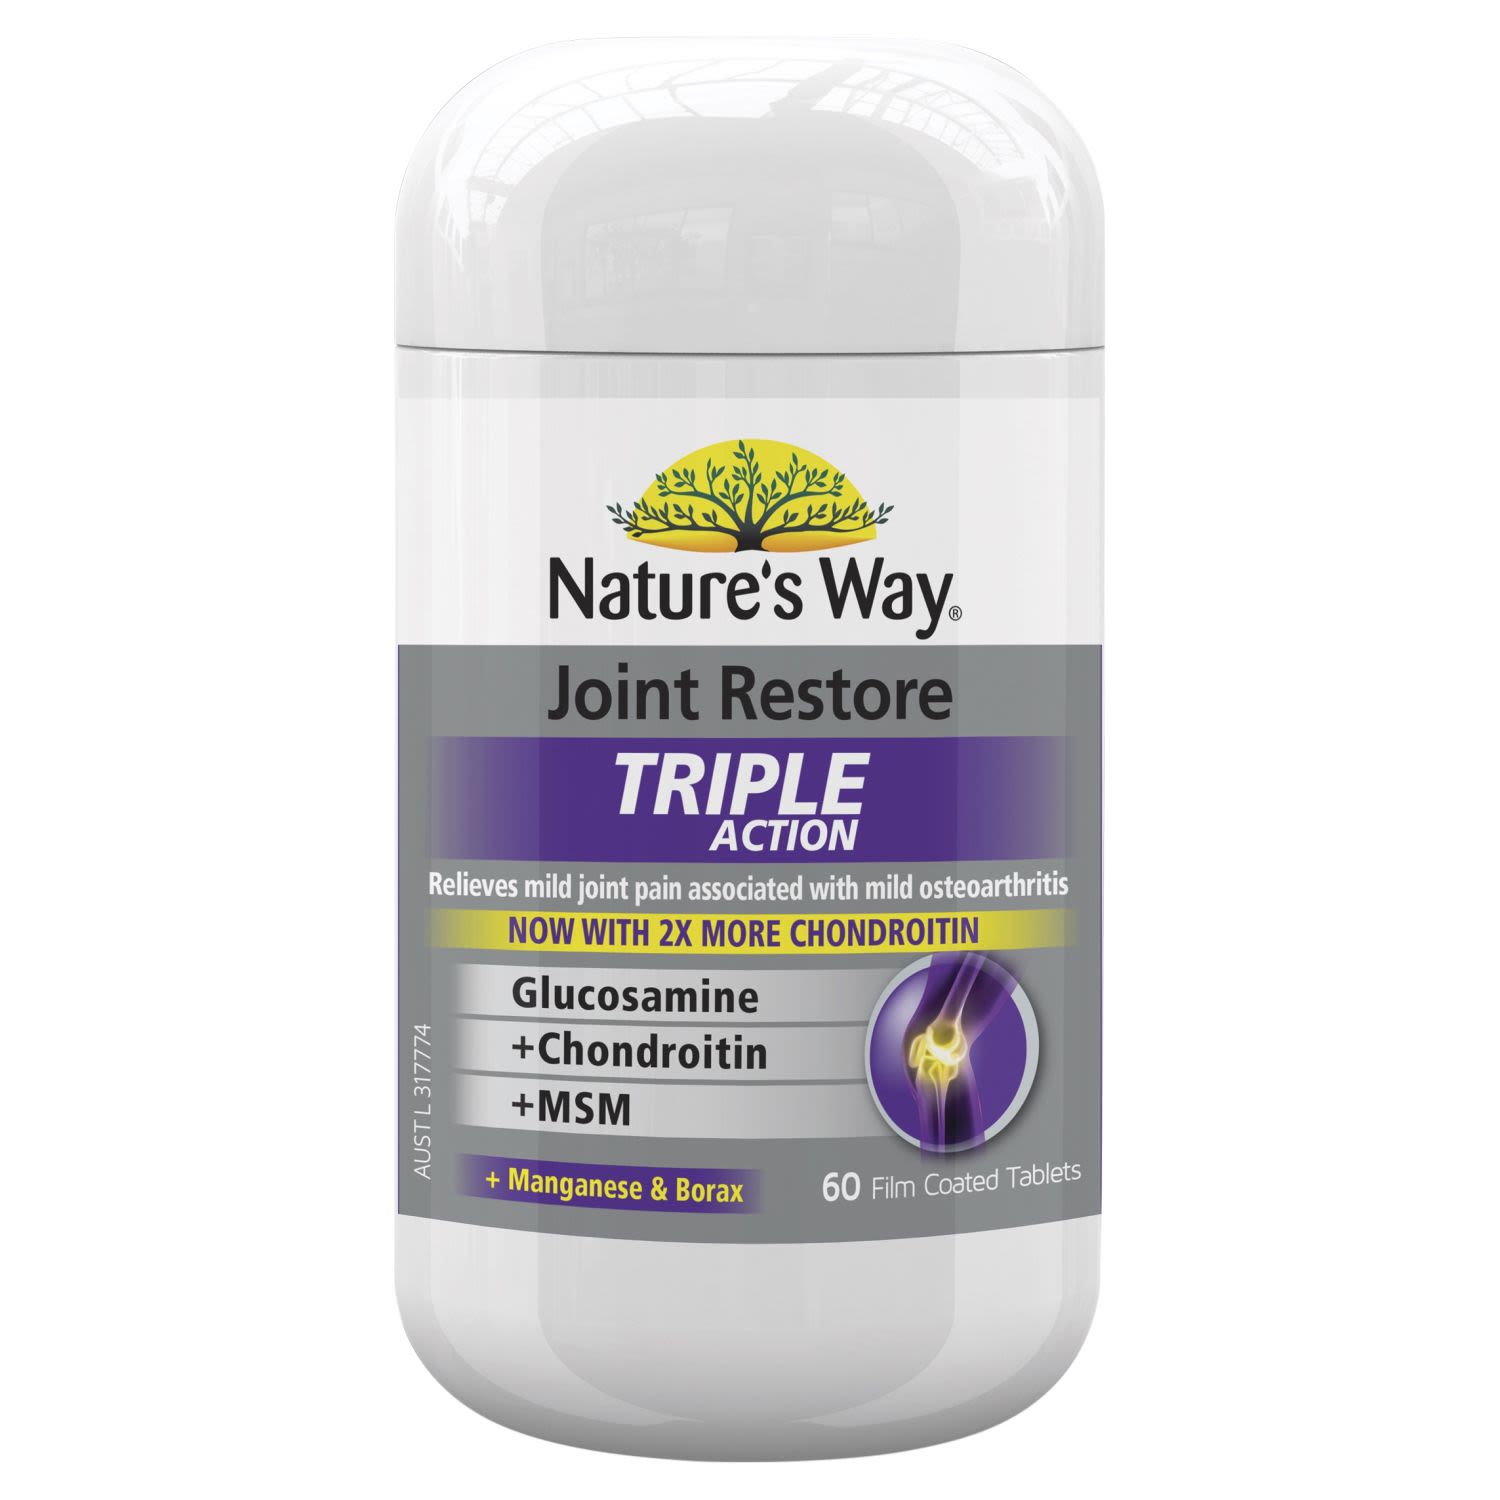 Nature's Way Joint Restore Triple Action, 60 Each